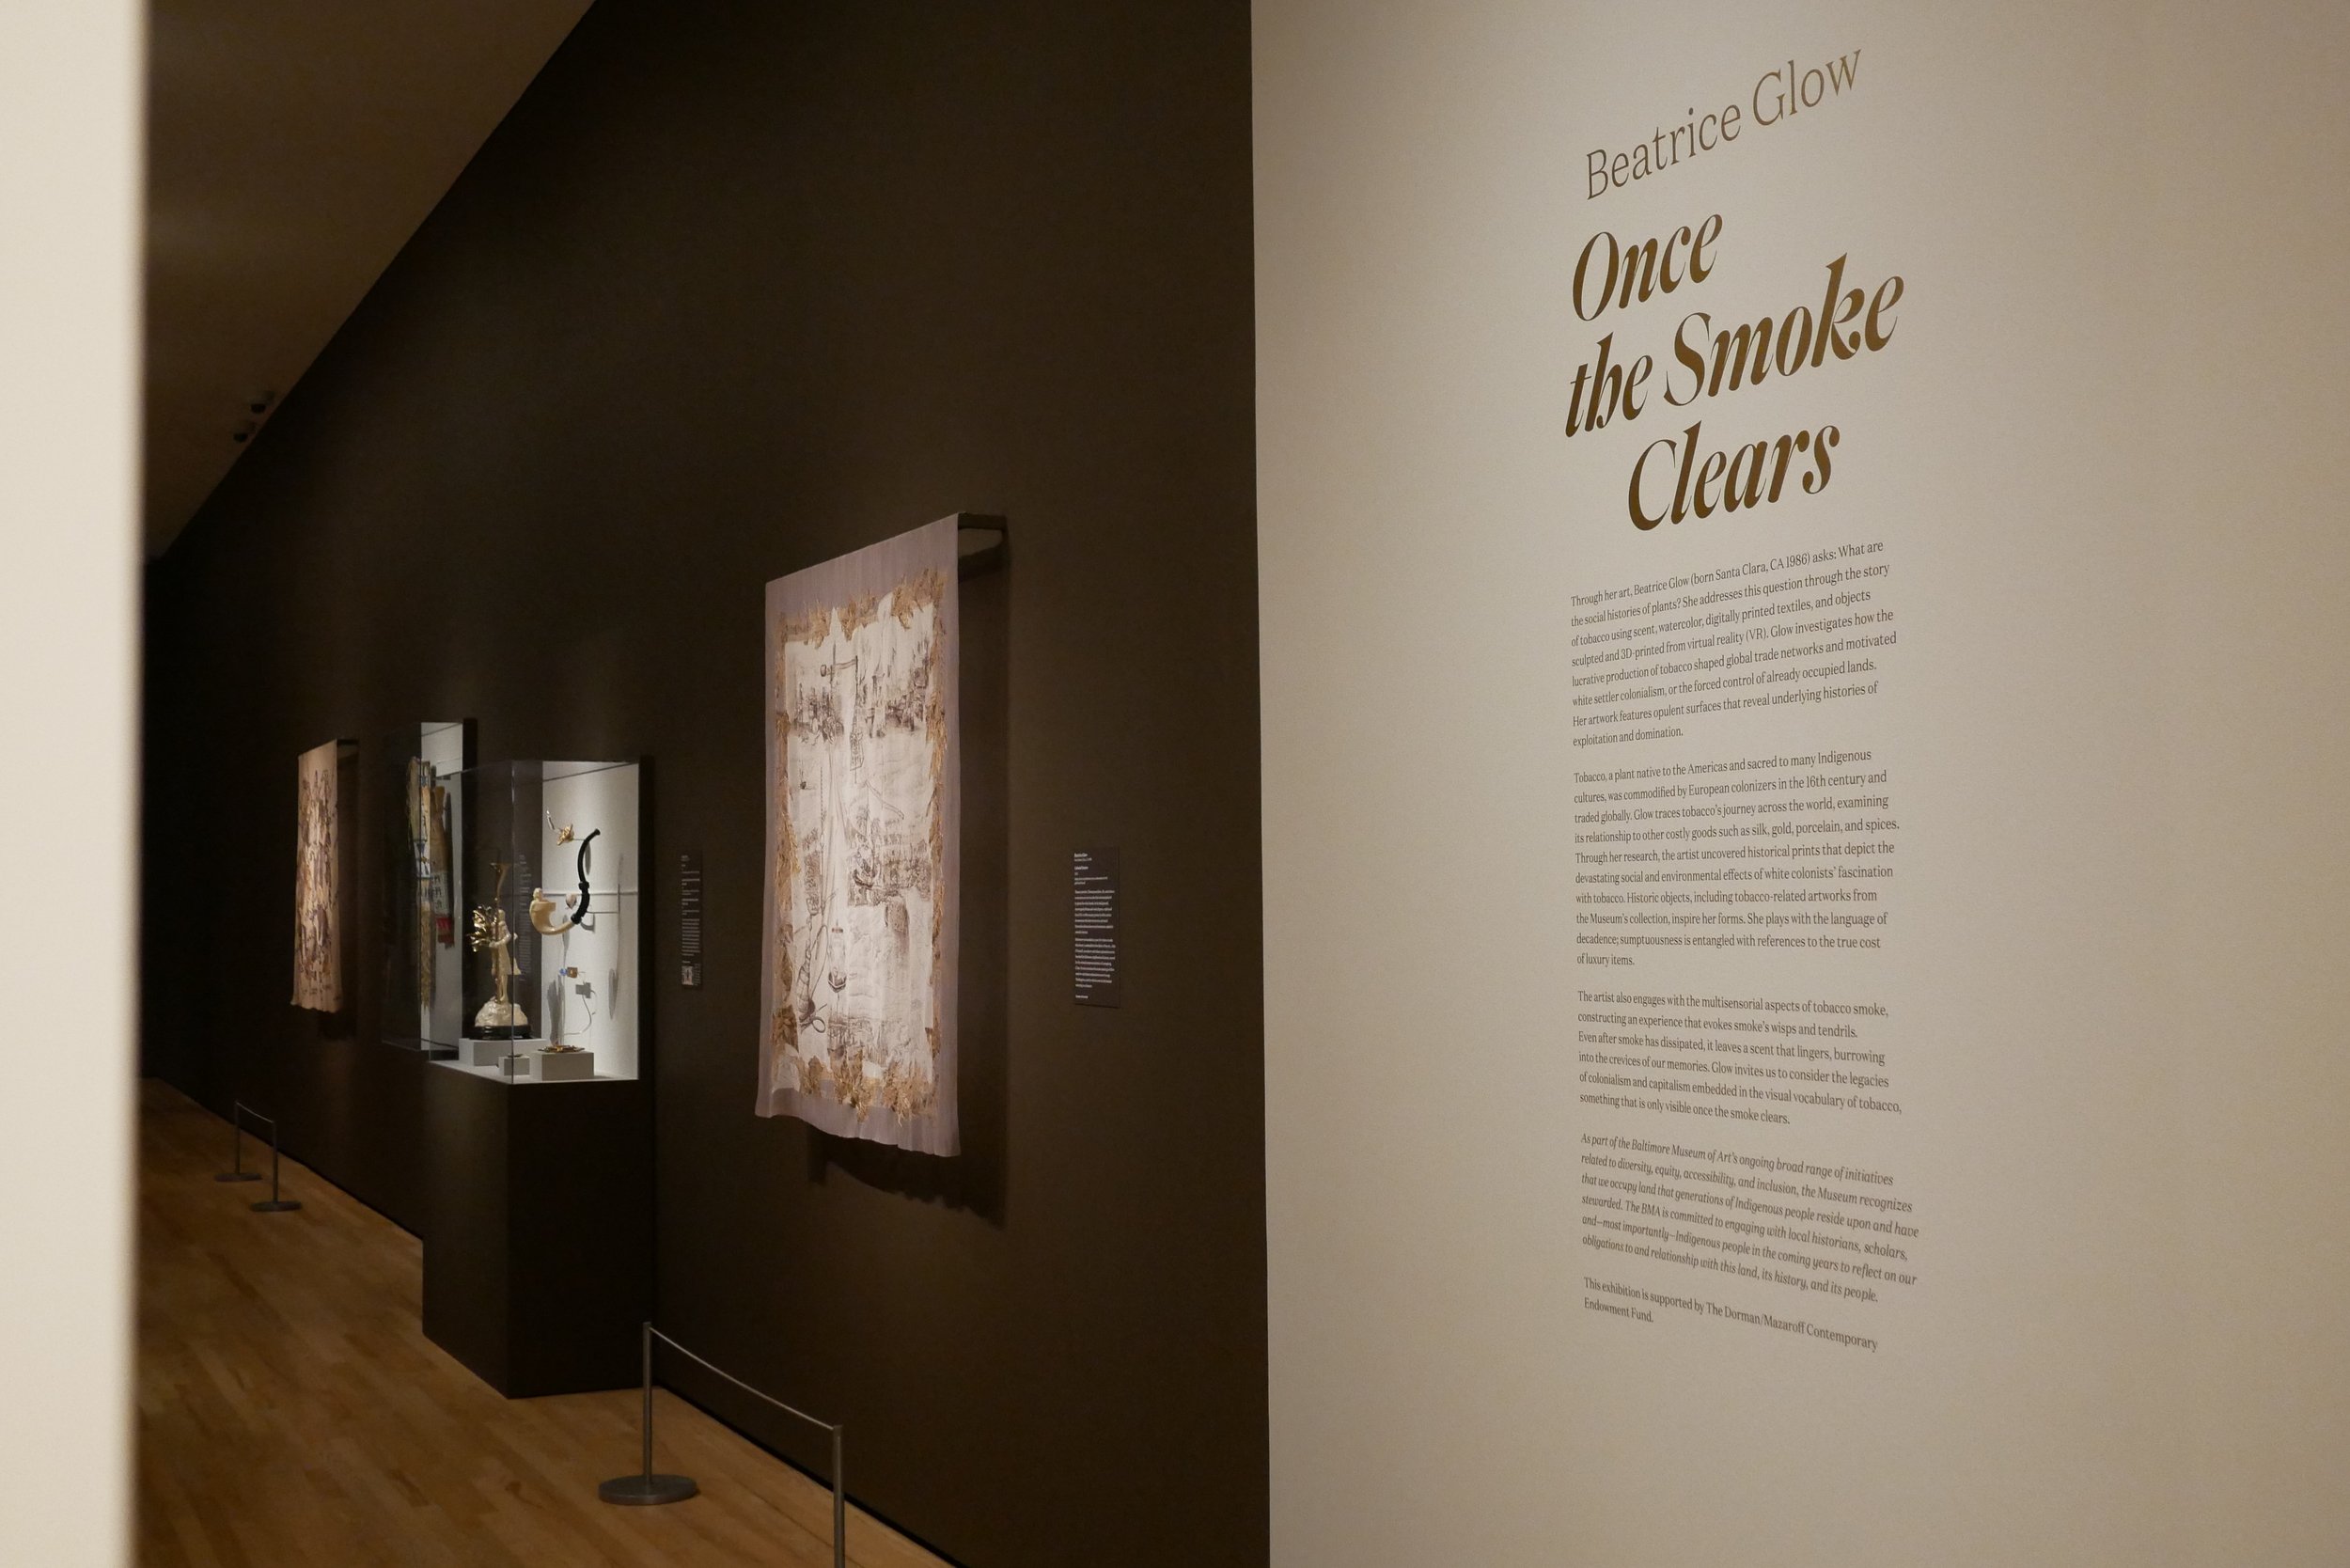 Beatrice Glow: Once the Smoke Clears, The Baltimore Museum of Art, May 15 – October 2, 2022, Photography by the artist.